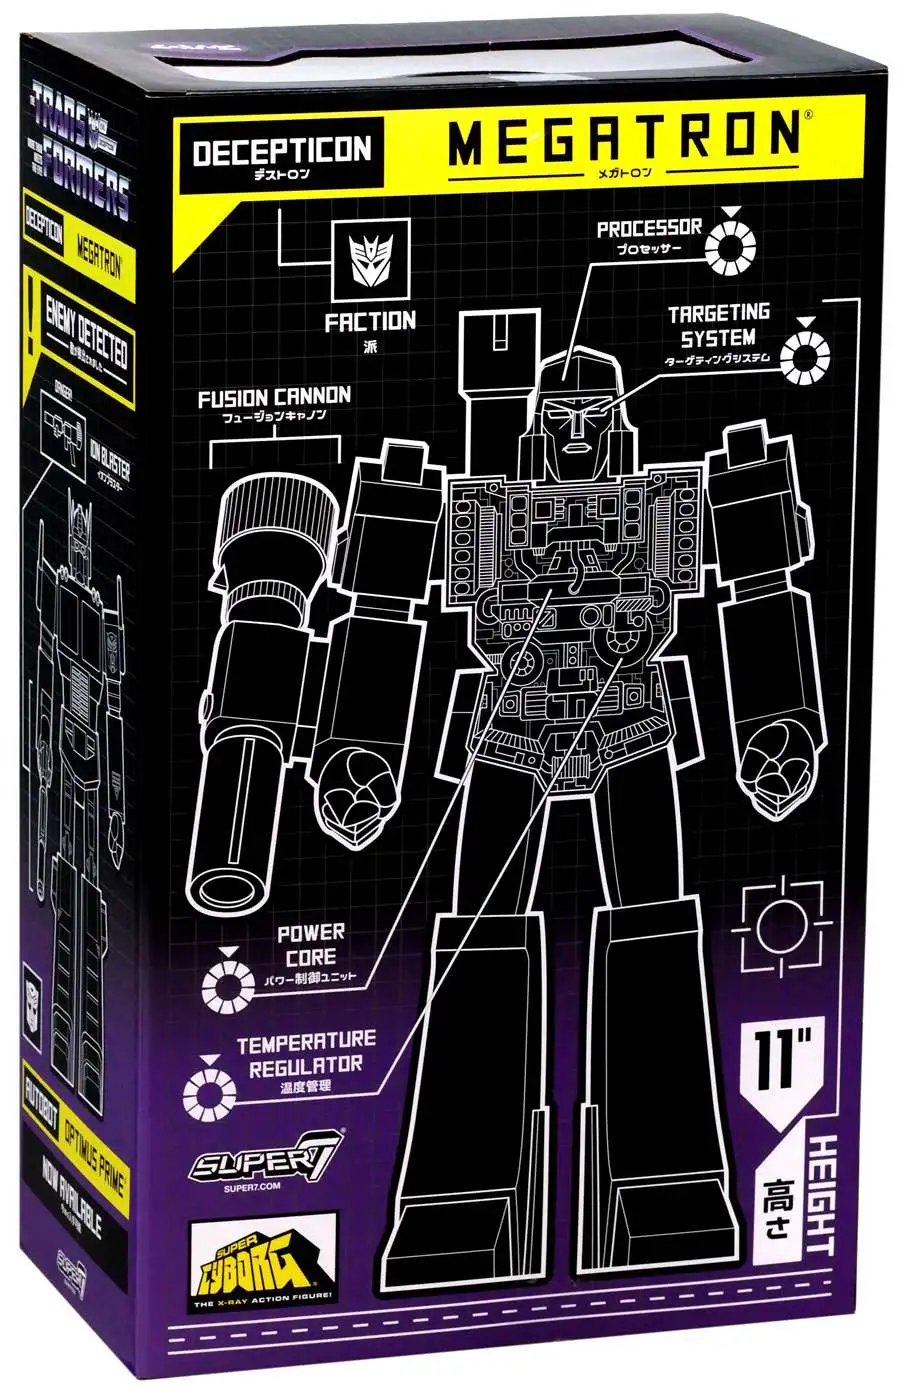 Details about   Megatron Super Cyborg 12 inch Cartoon X-Ray Articulated Figure Super 7 